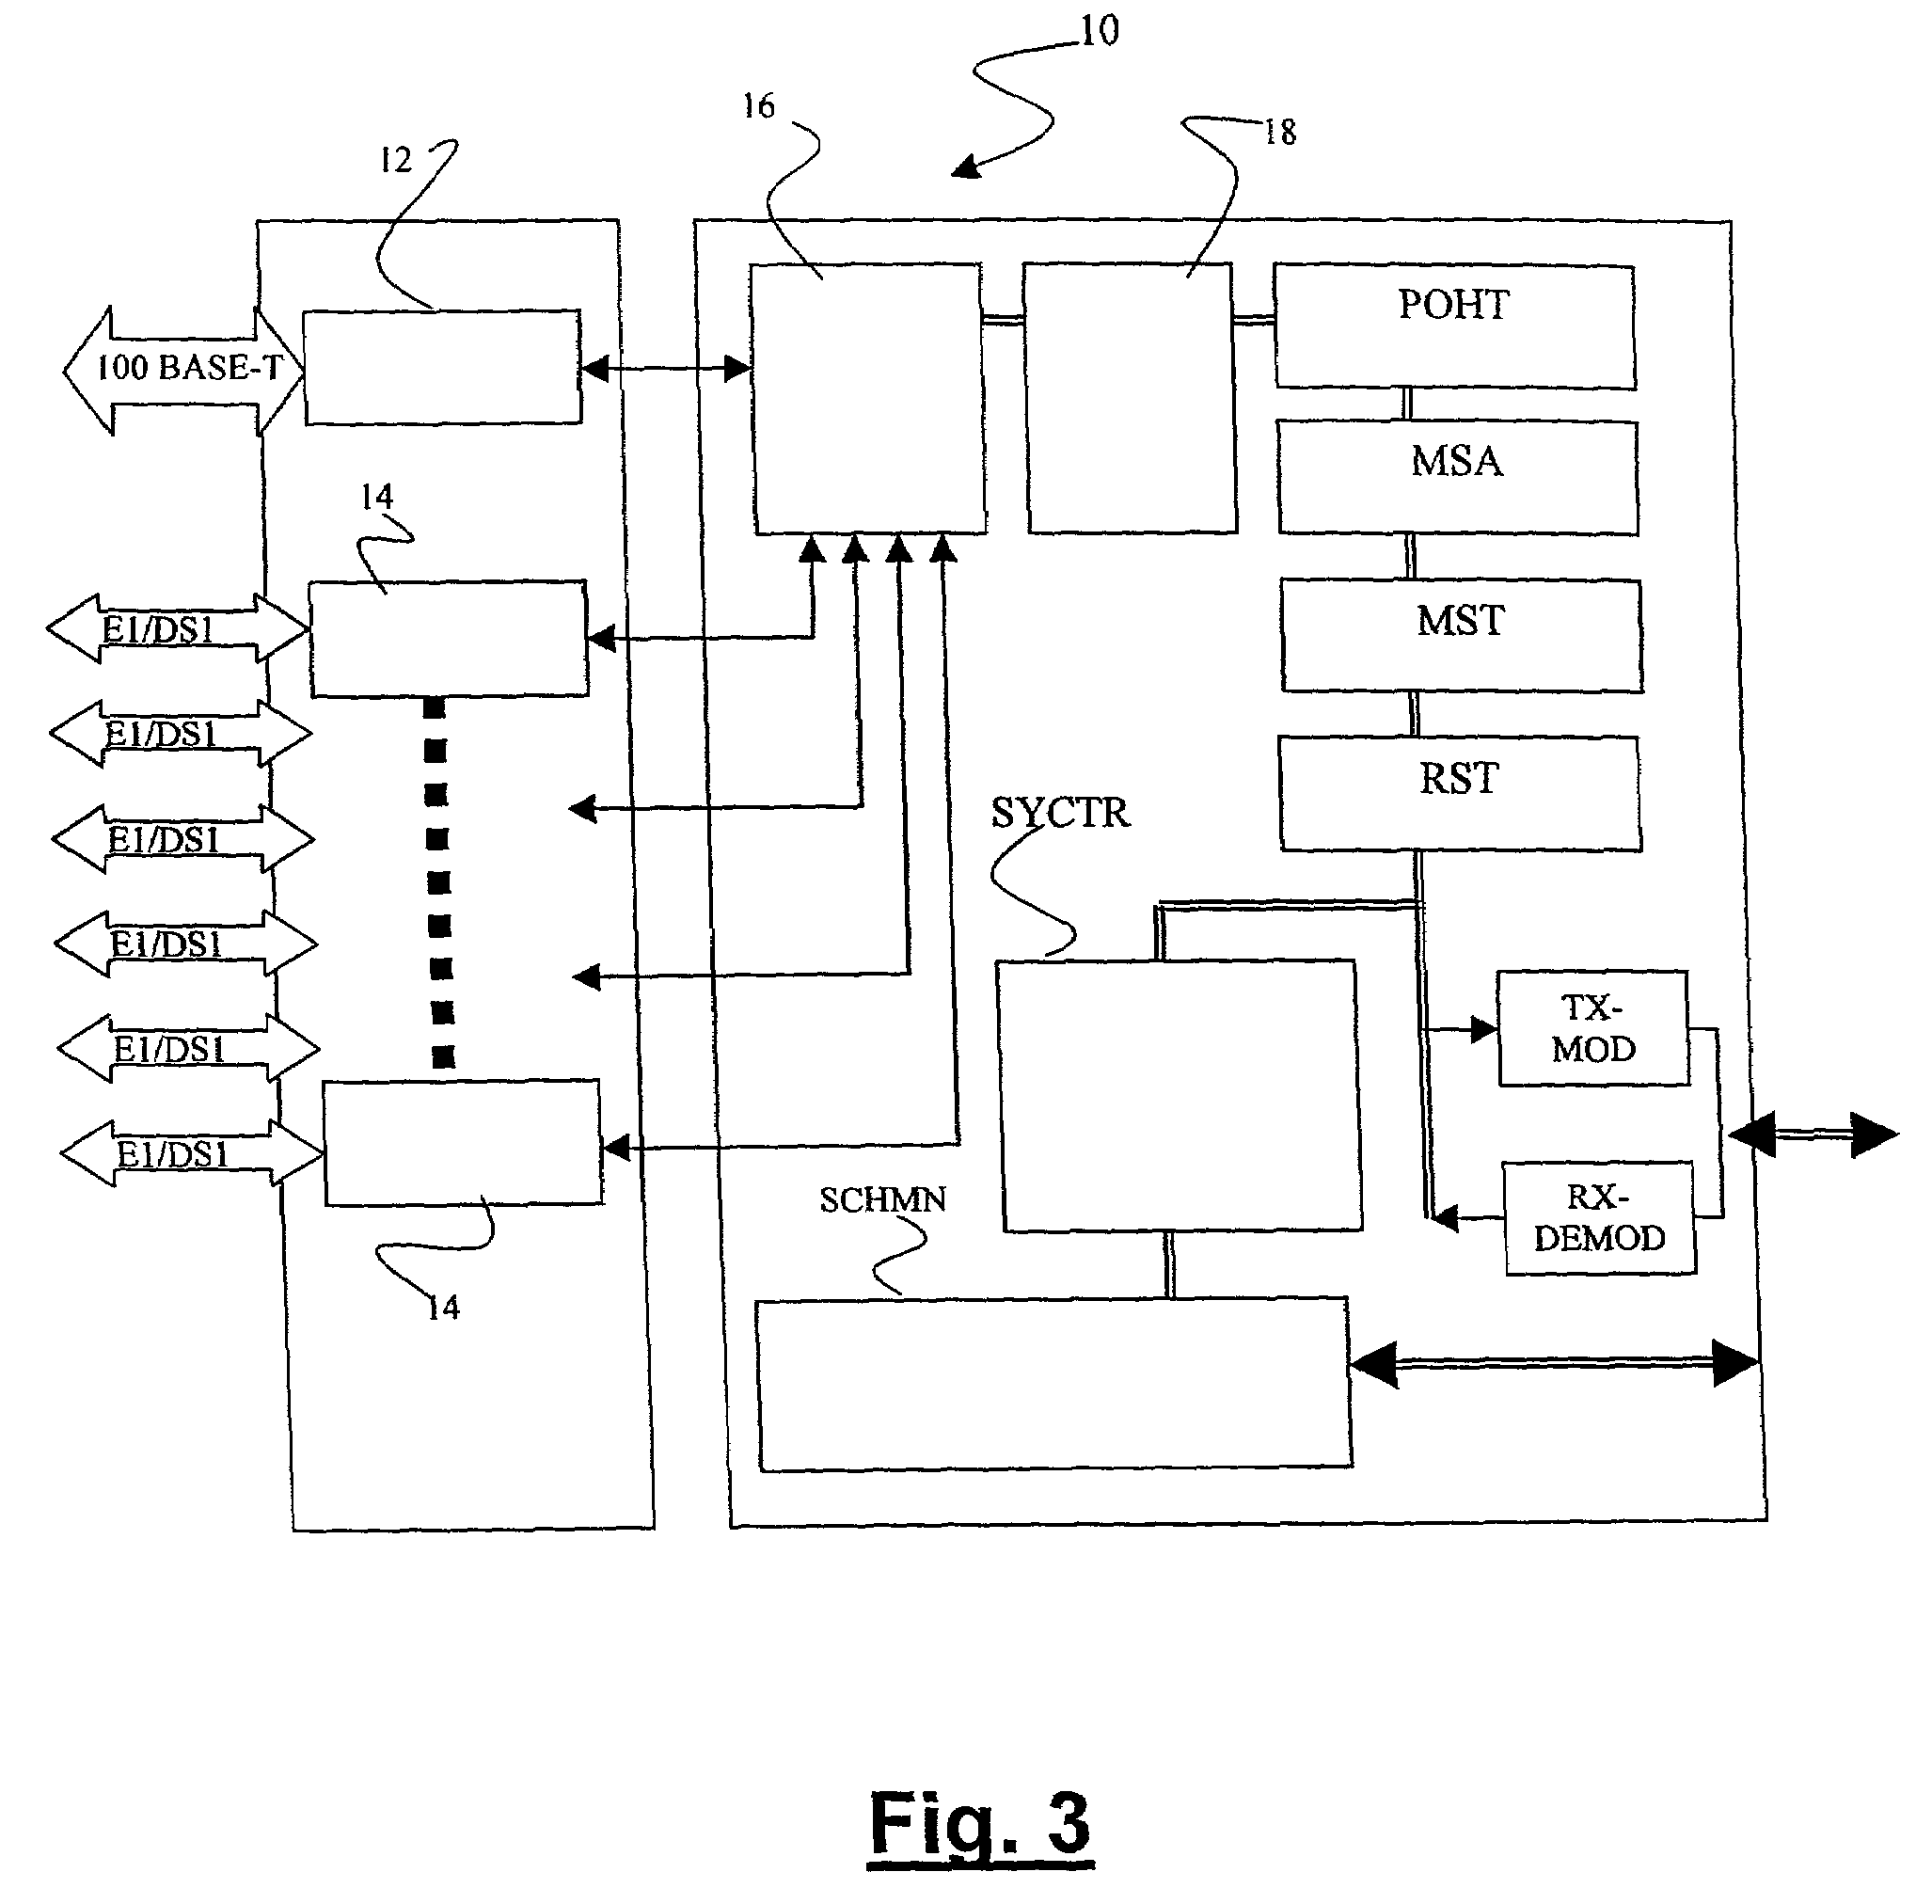 Method and apparatus for mapping fast ethernet data interfaces into a single VC-4 virtual container of a STM-1/OC-3 payload transmitted in a radio-link system